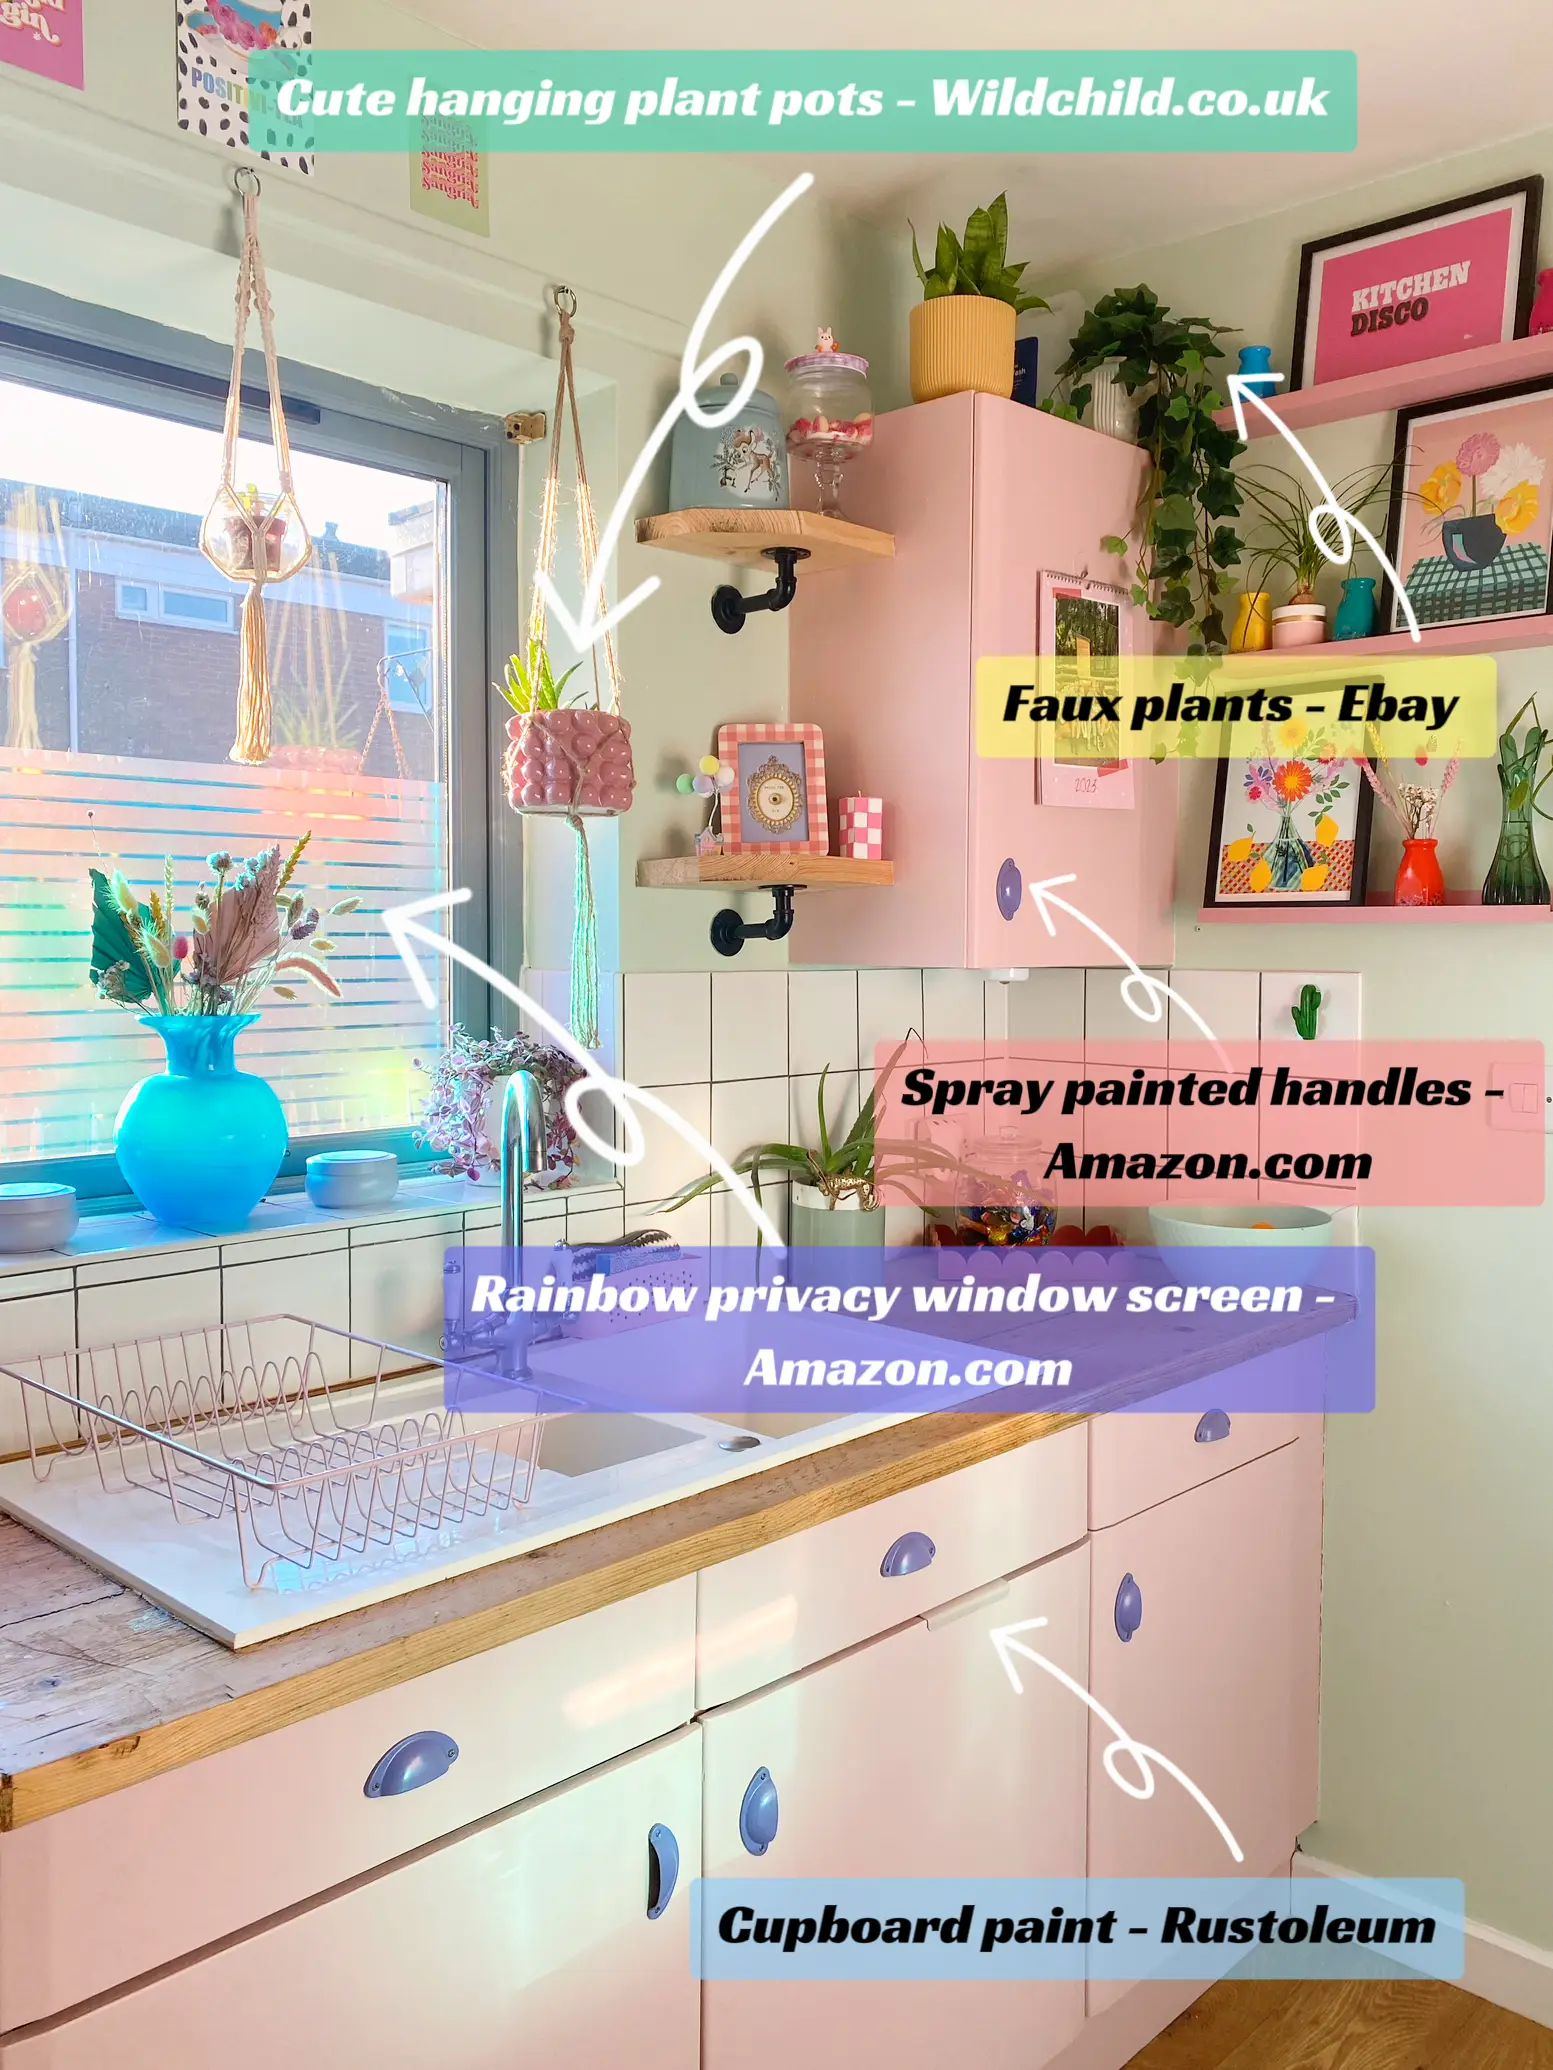 A Closer Look At The Pastel Kitchen